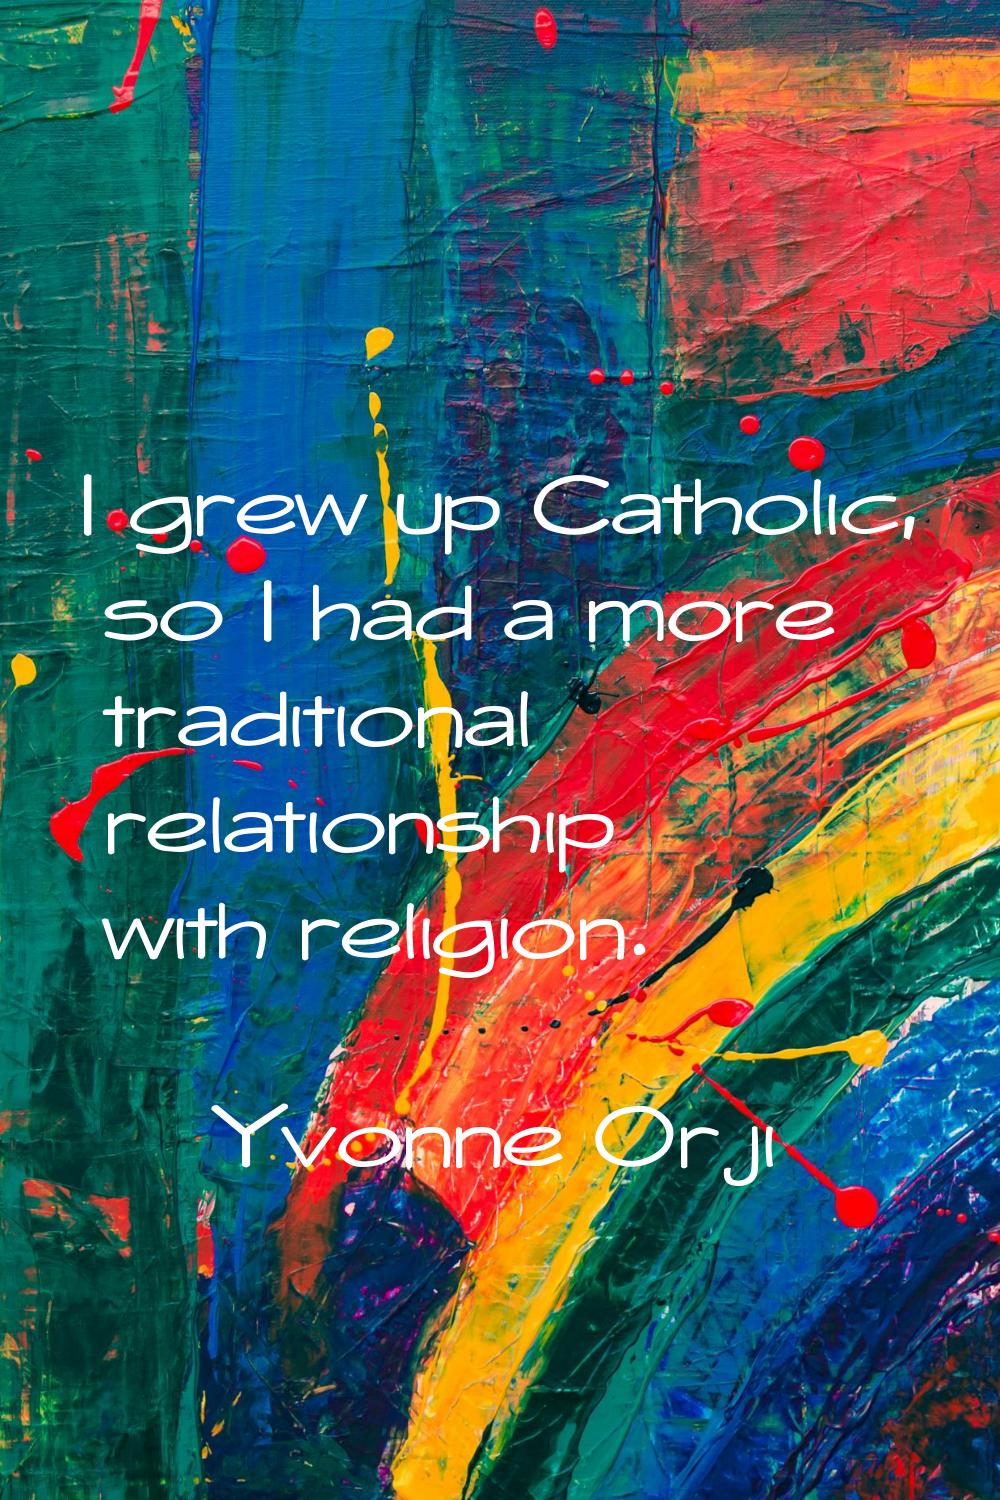 I grew up Catholic, so I had a more traditional relationship with religion.